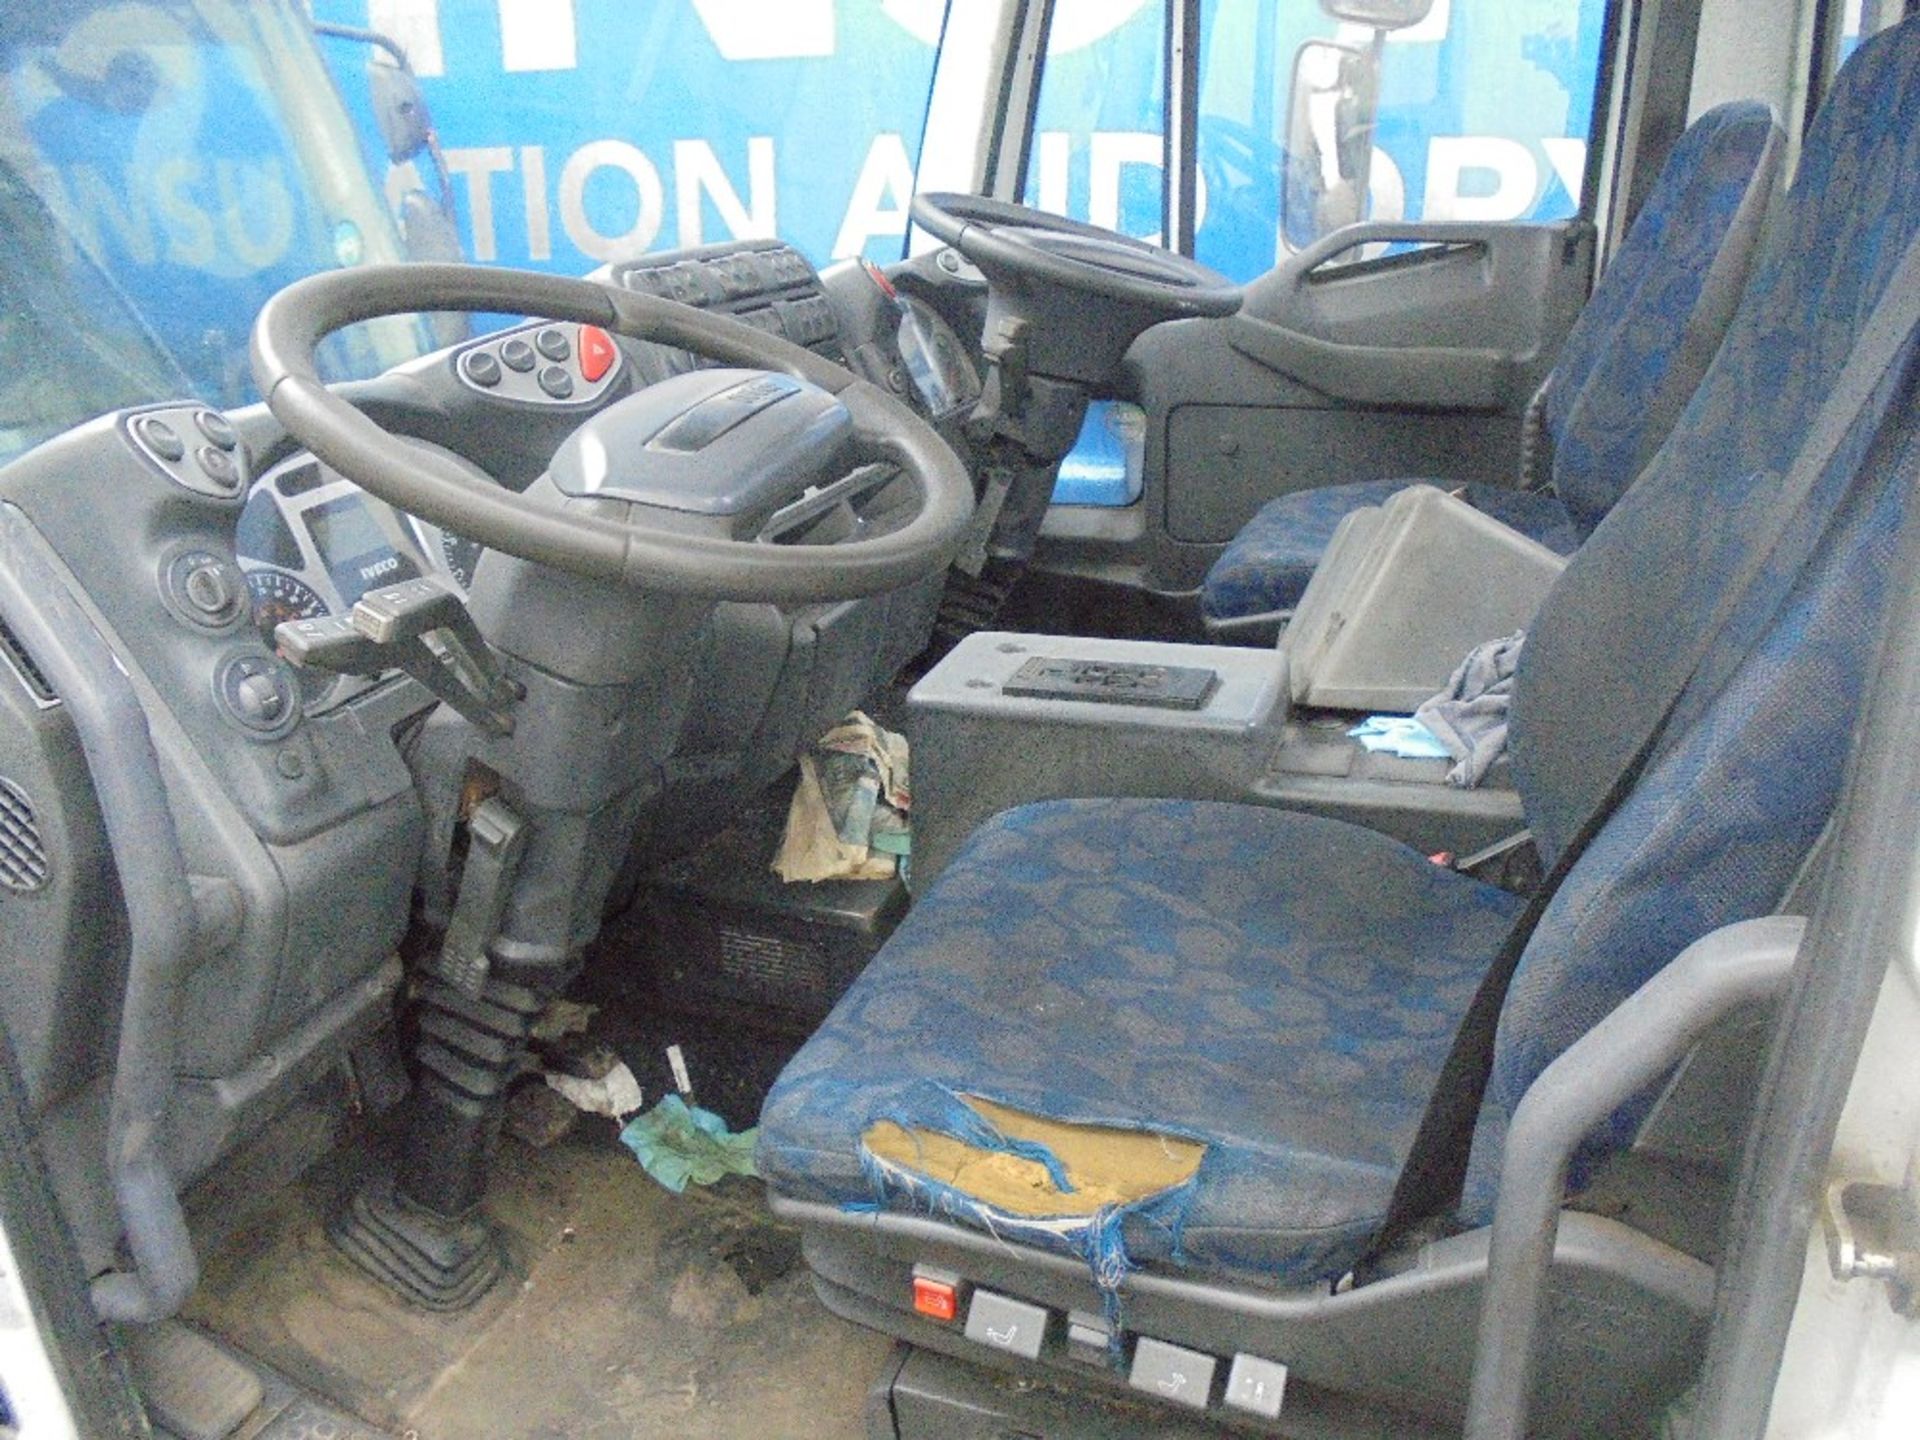 Iveco 150E21 Dual Steer Chassis Cab, Registration No. RX05 RWU, First Registered: 2005 - Image 3 of 3